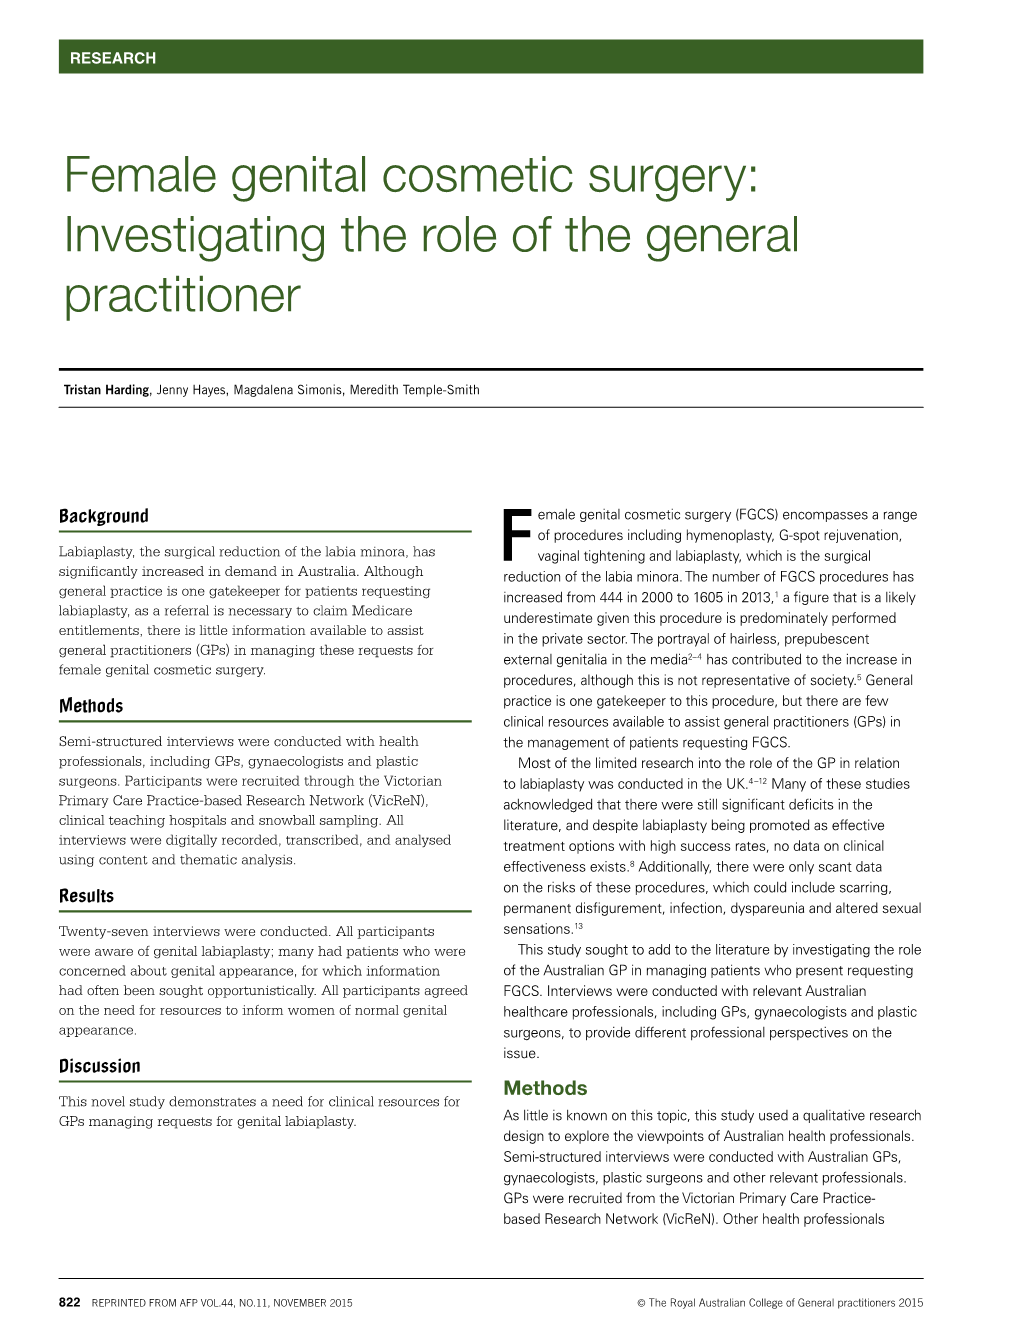 Female Genital Cosmetic Surgery: Investigating the Role of the General Practitioner